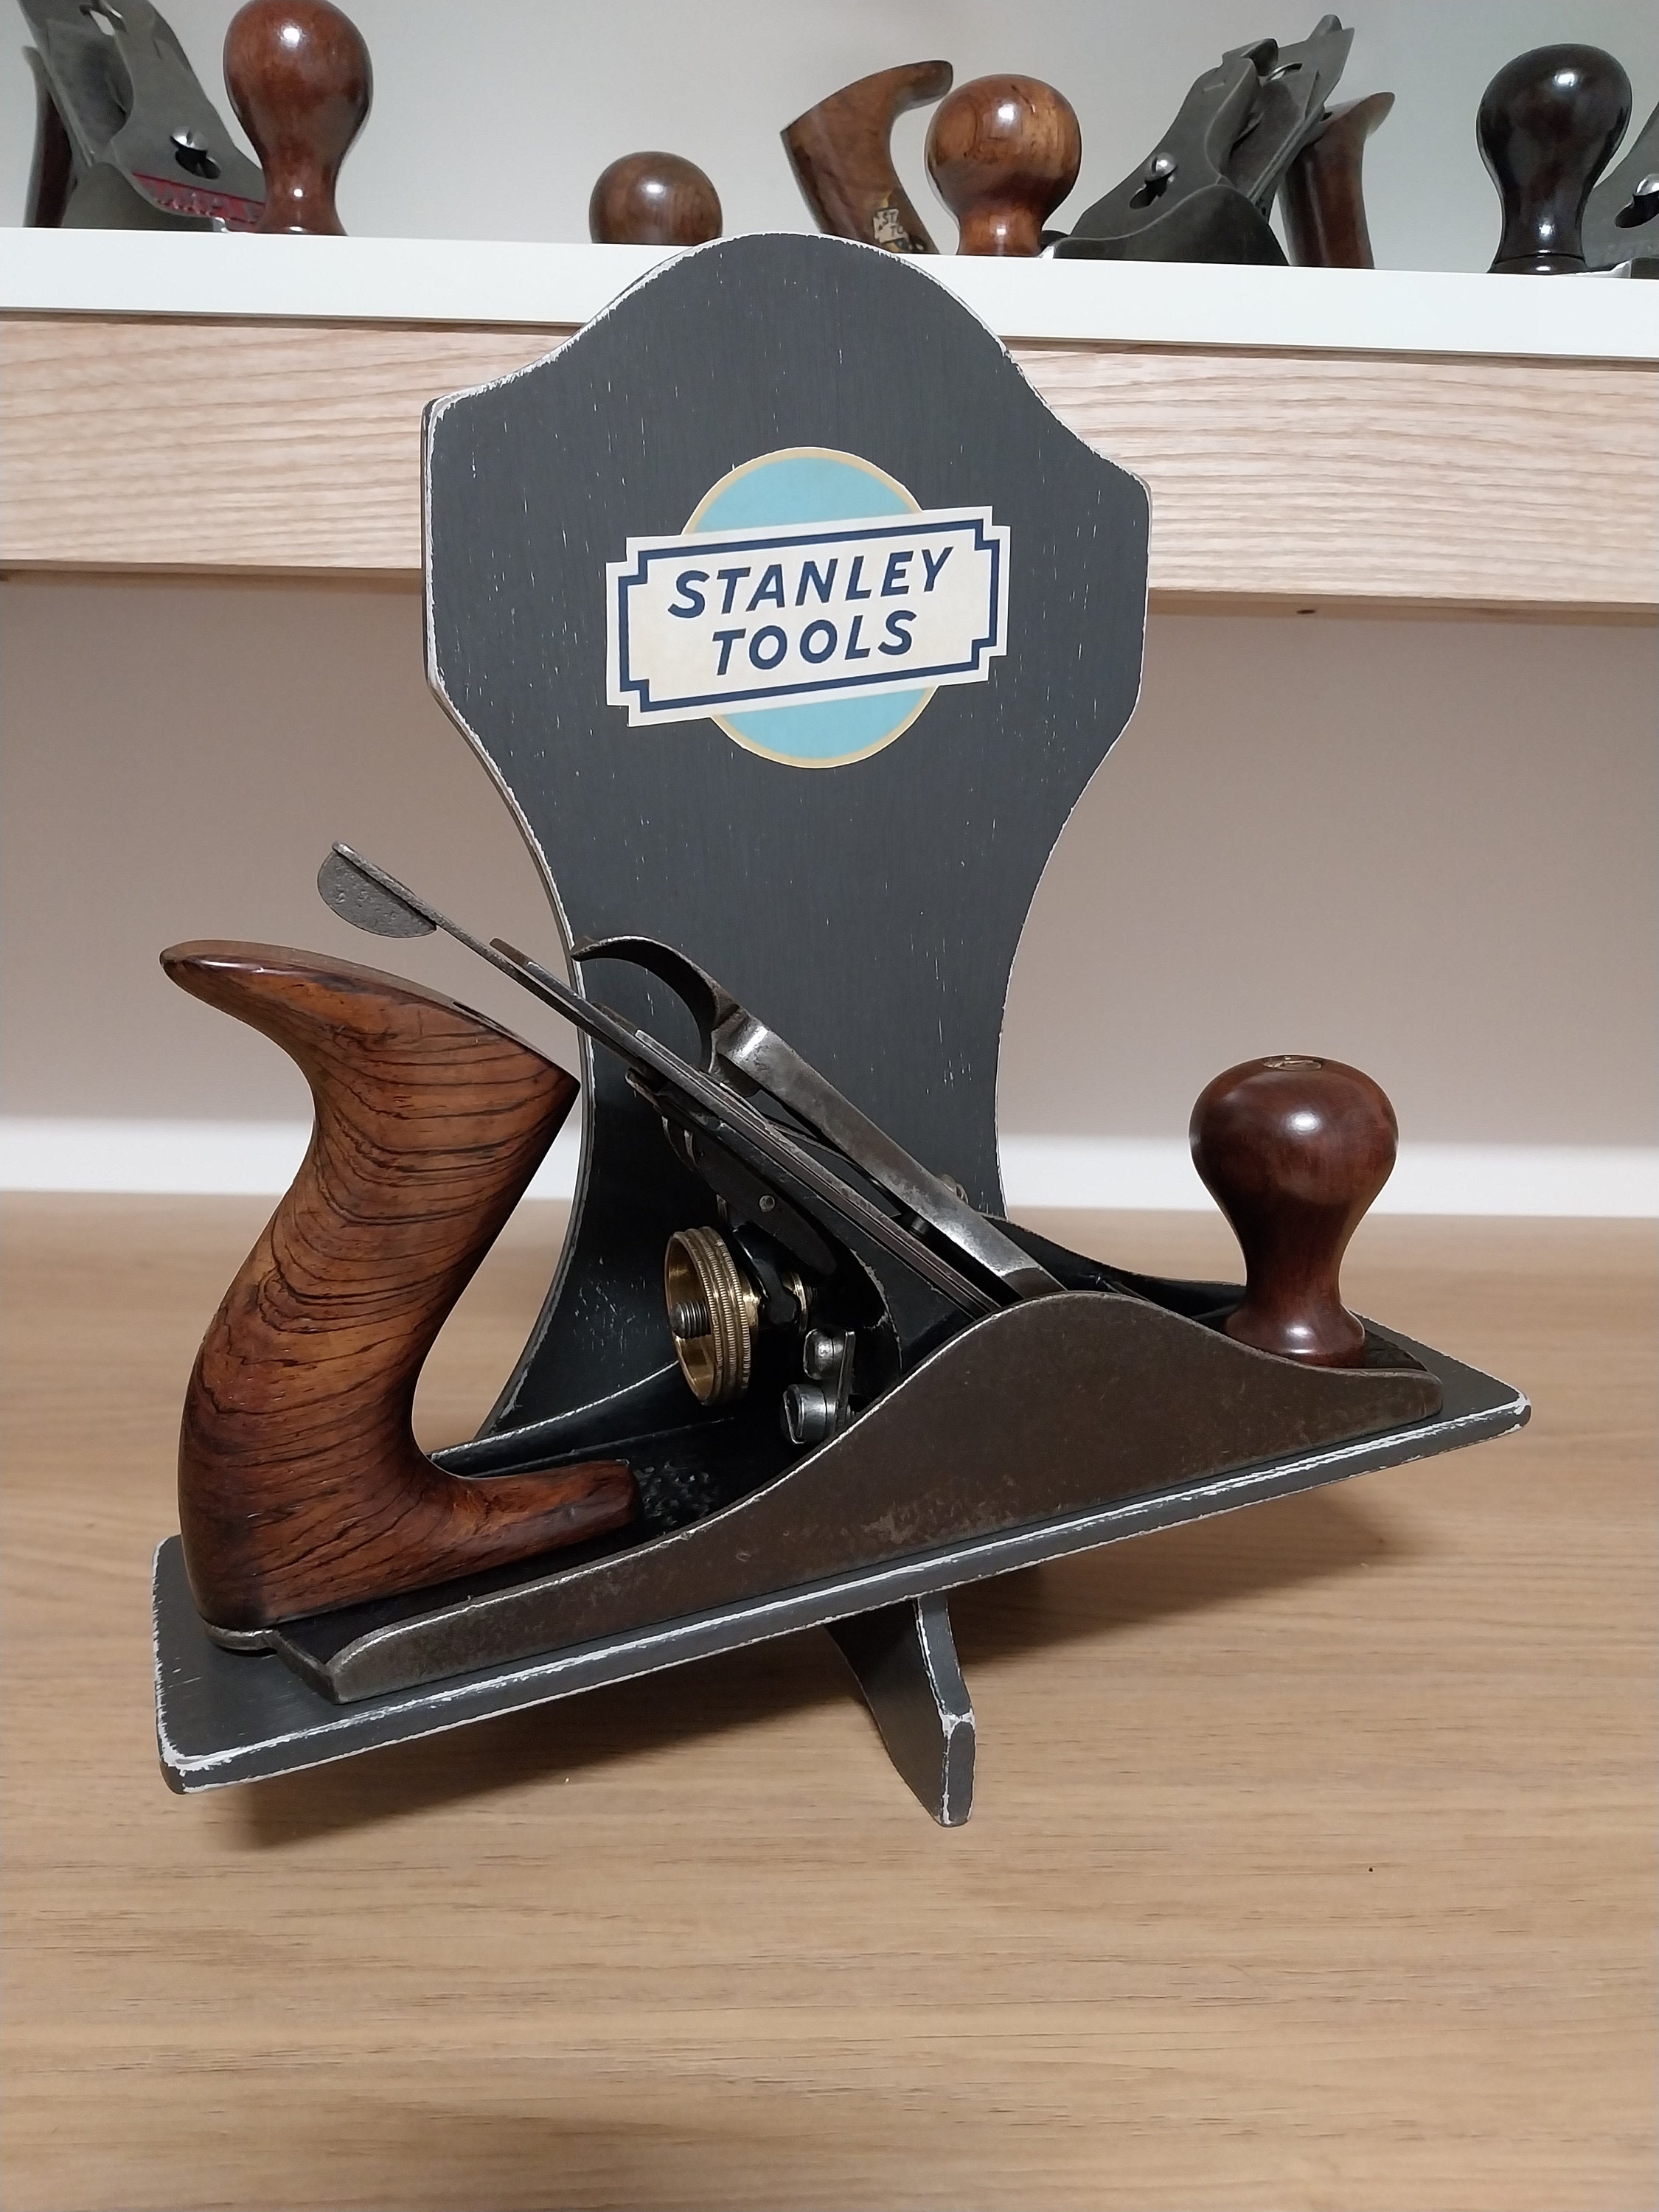 1956 STANLEY ELECTRIC TOOLS ROUTER PLANE SAW metal tin sign wall